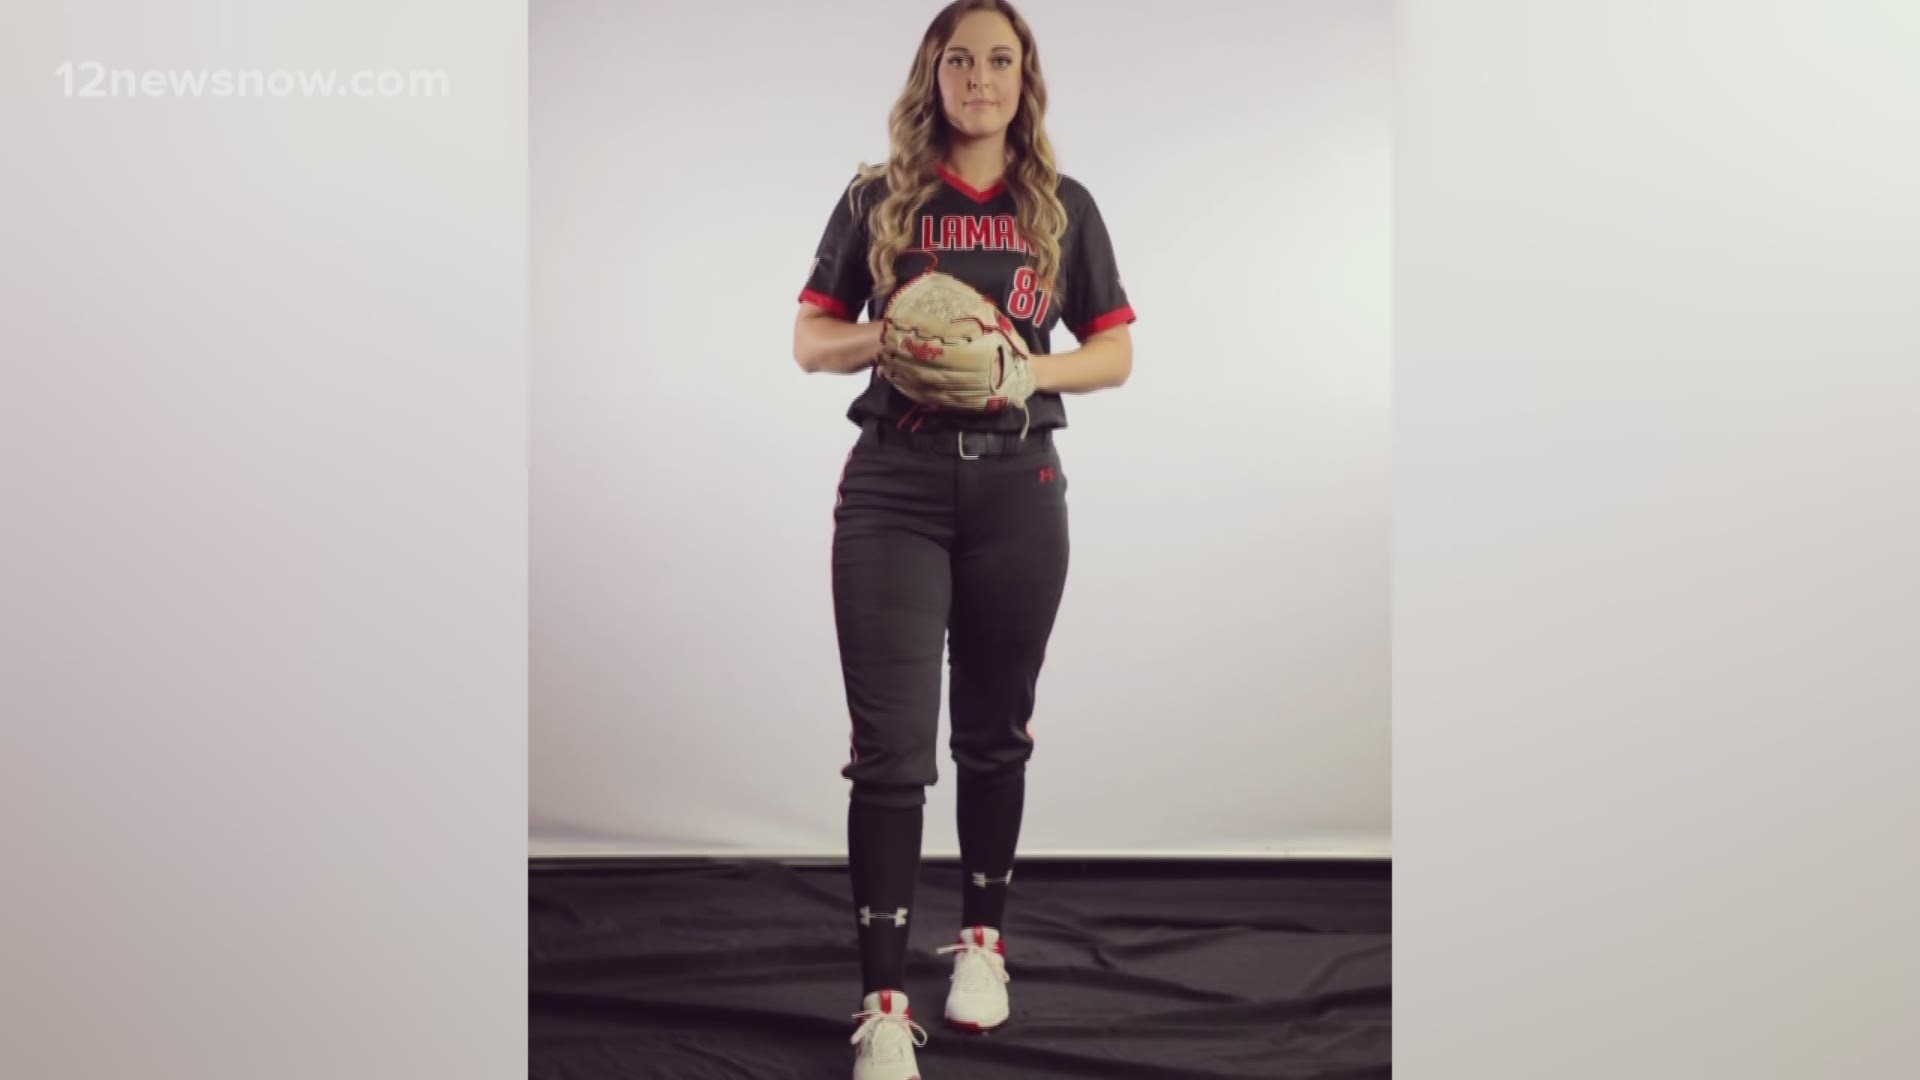 Lamar softball player decides to pass up extra year granted by NCAA